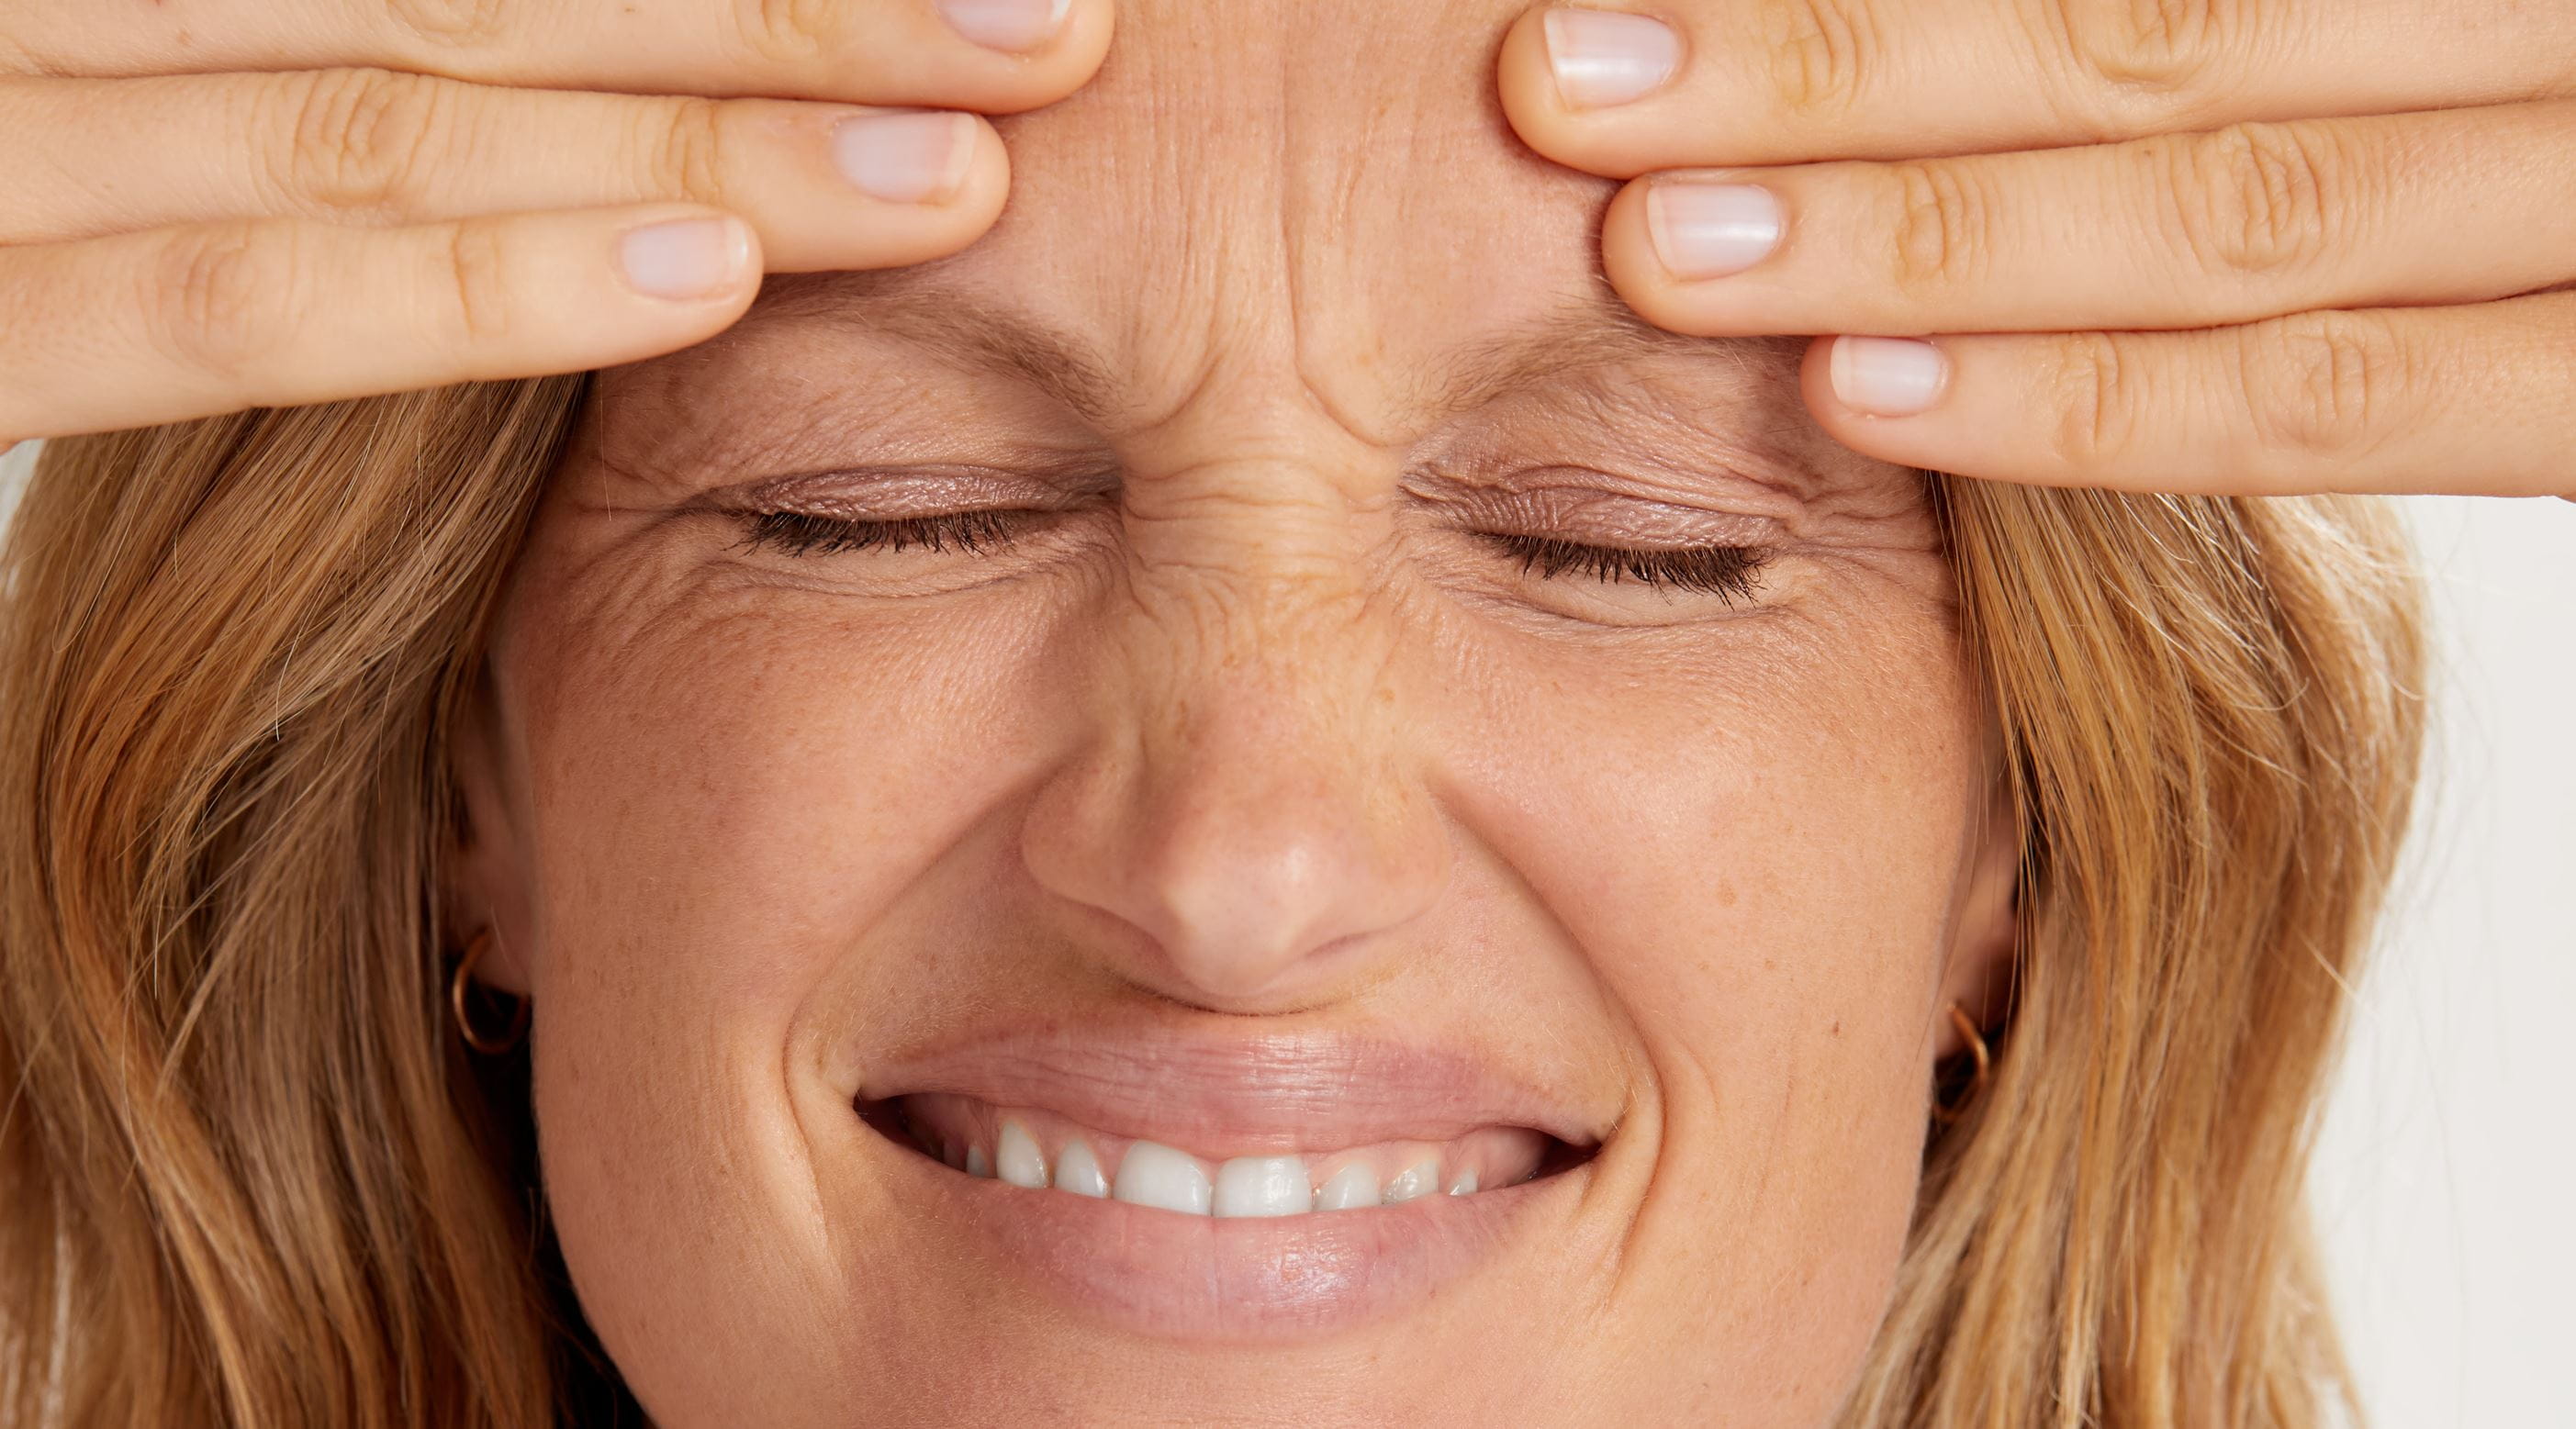 Forehead Wrinkles: 7 Ways to Get Rid of and Prevent Them